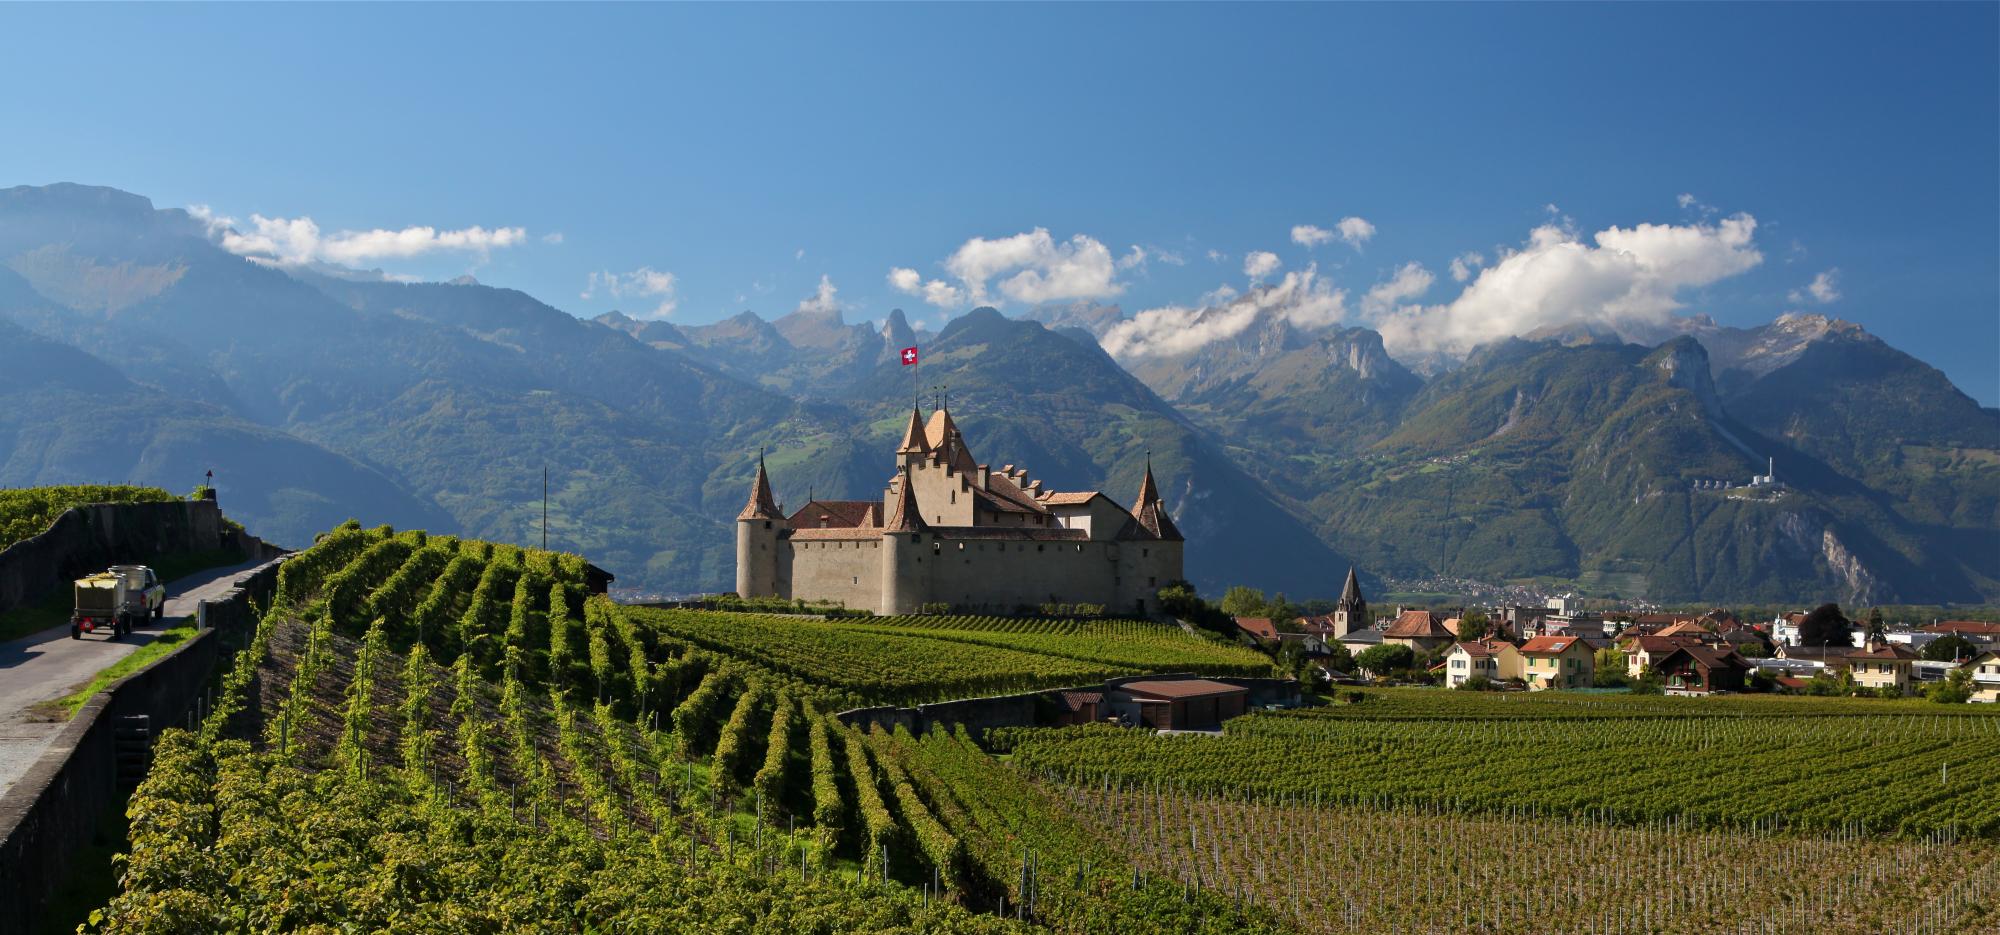 Castle of Aigle with vines - summer - Leysin